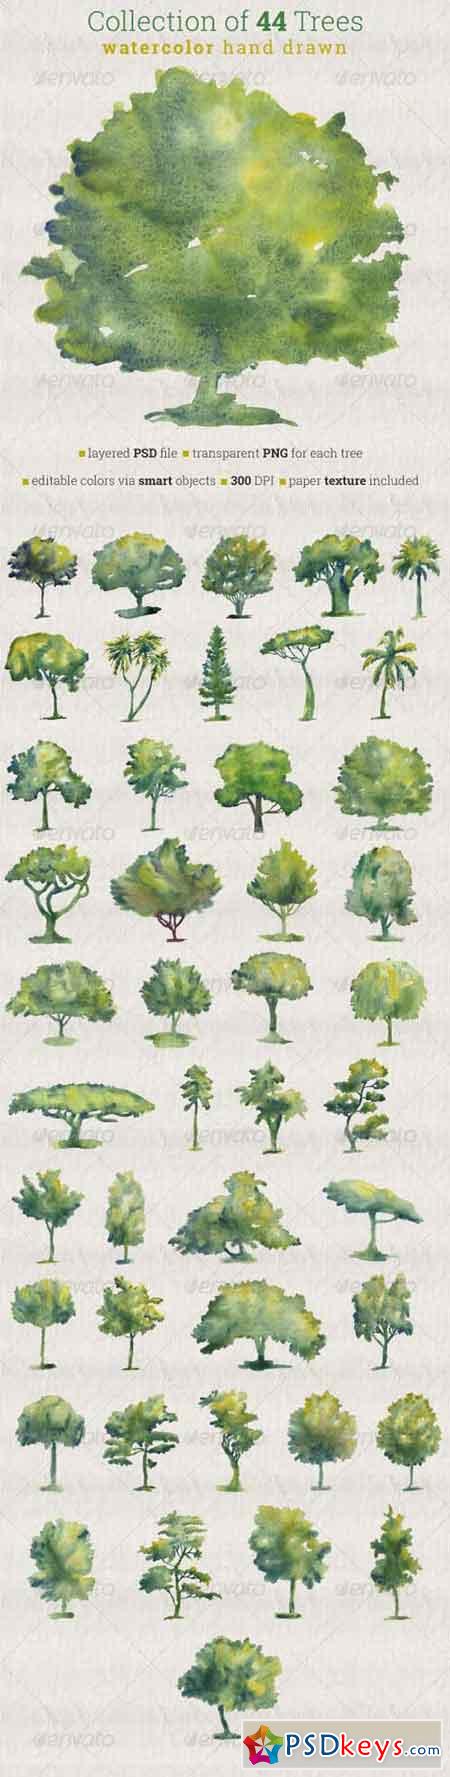 Collection of 44 Watercolor Trees 6762350